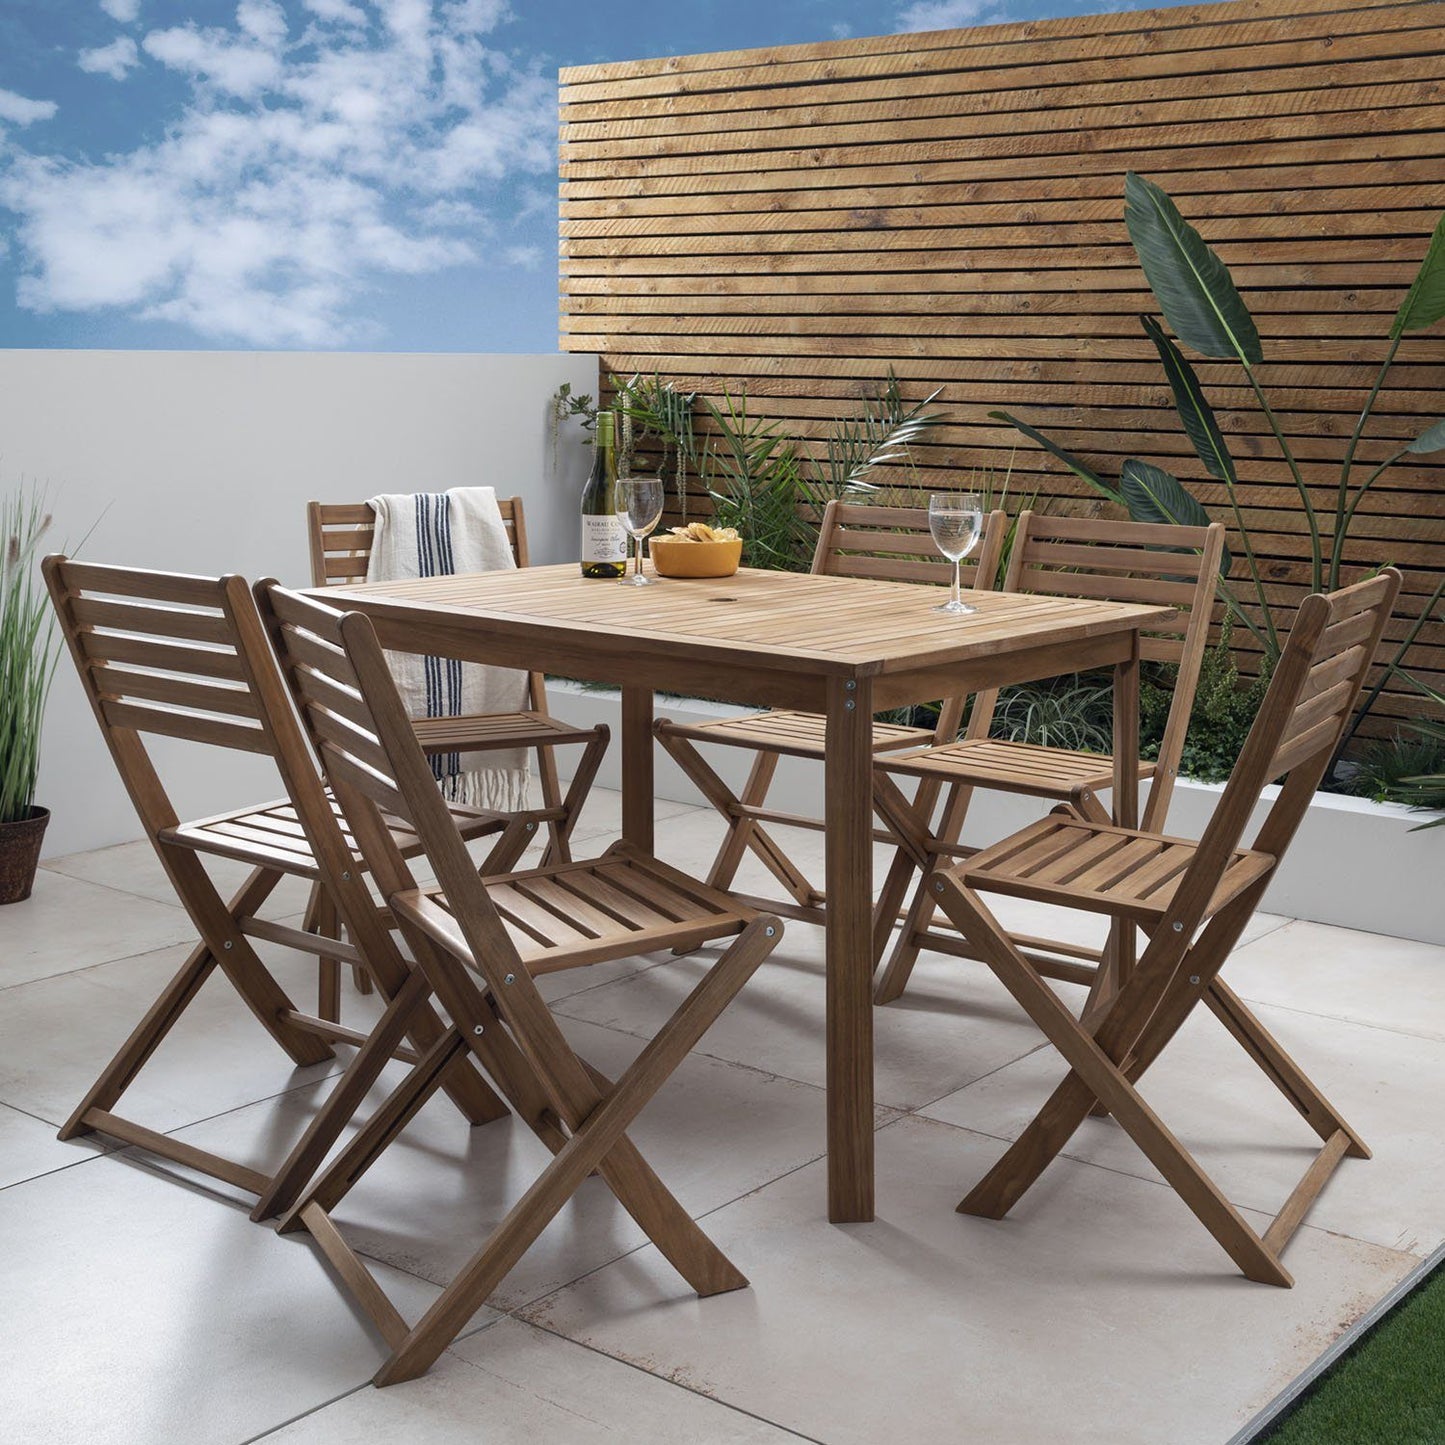 Ackley wooden garden furniture – 6 seater outdoor dining set with grey premium parasol - Laura James